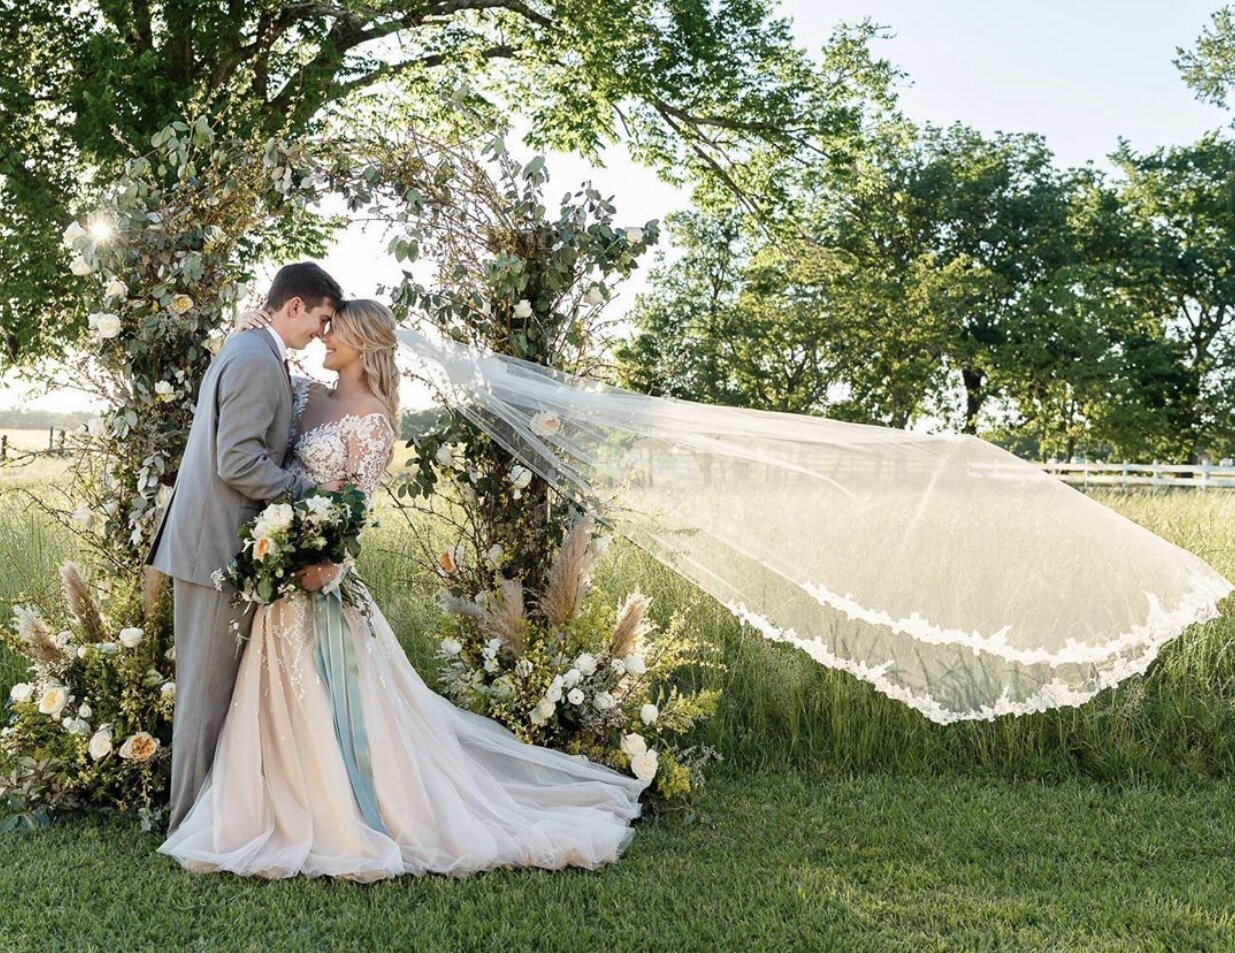 A bride and groom posing in a field in front of a gorgeous floral installation. The bride is facing the groom and her veil is flowing behind her